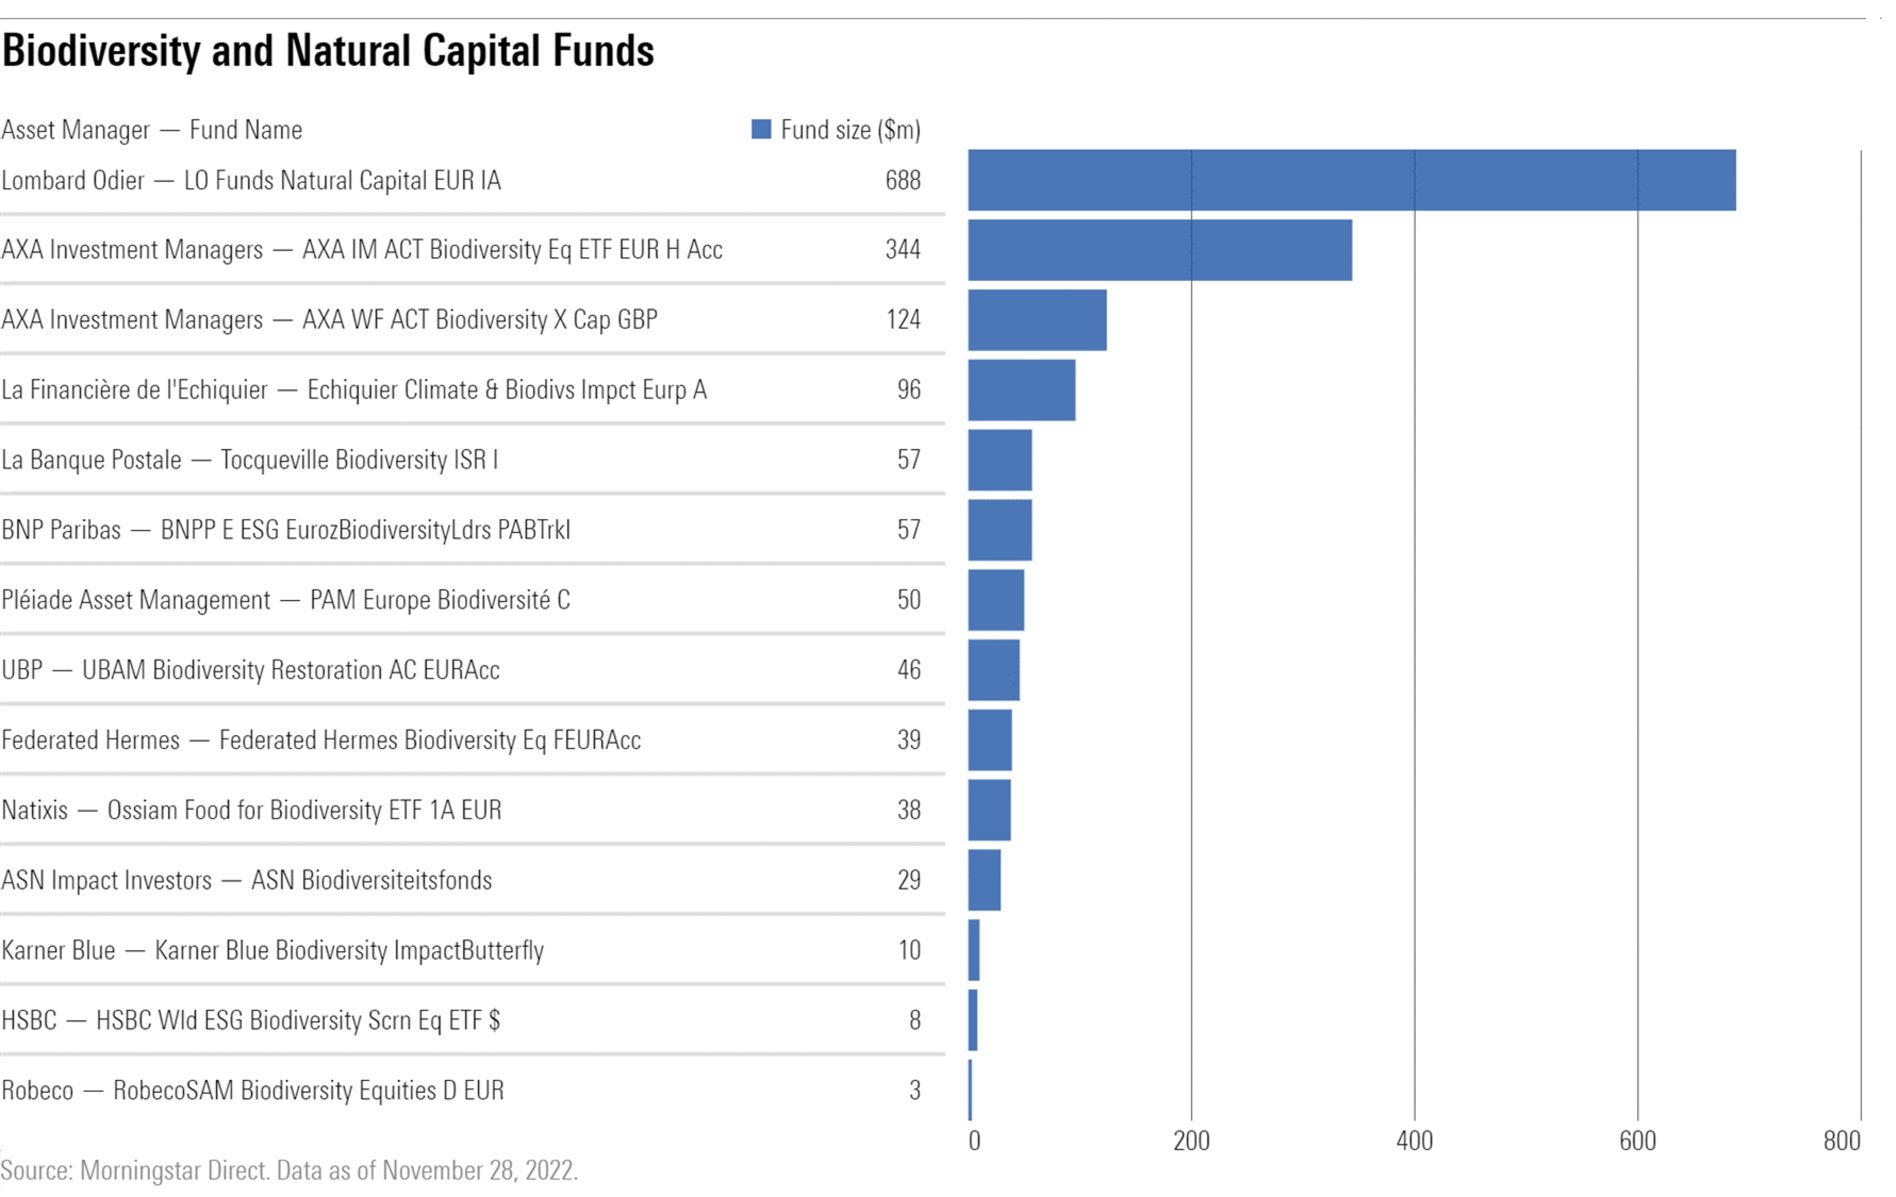 Horizontal bar chart showing the 14 biodiversity and natural capital-themed funds found in Morningstar Direct, which represent USD 1.6 billion of assets.